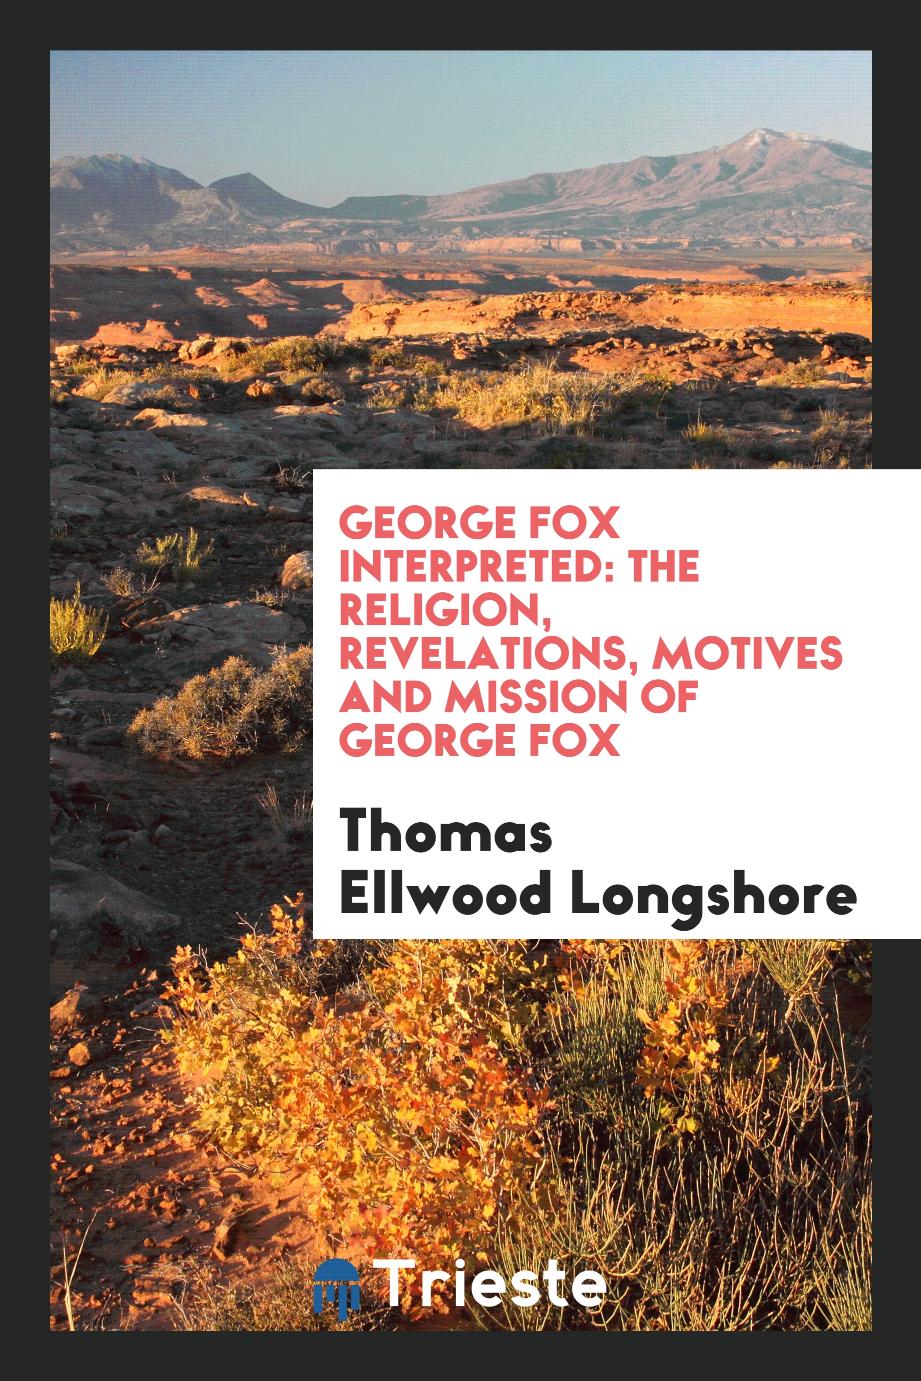 George Fox Interpreted: The Religion, Revelations, Motives and Mission of George Fox